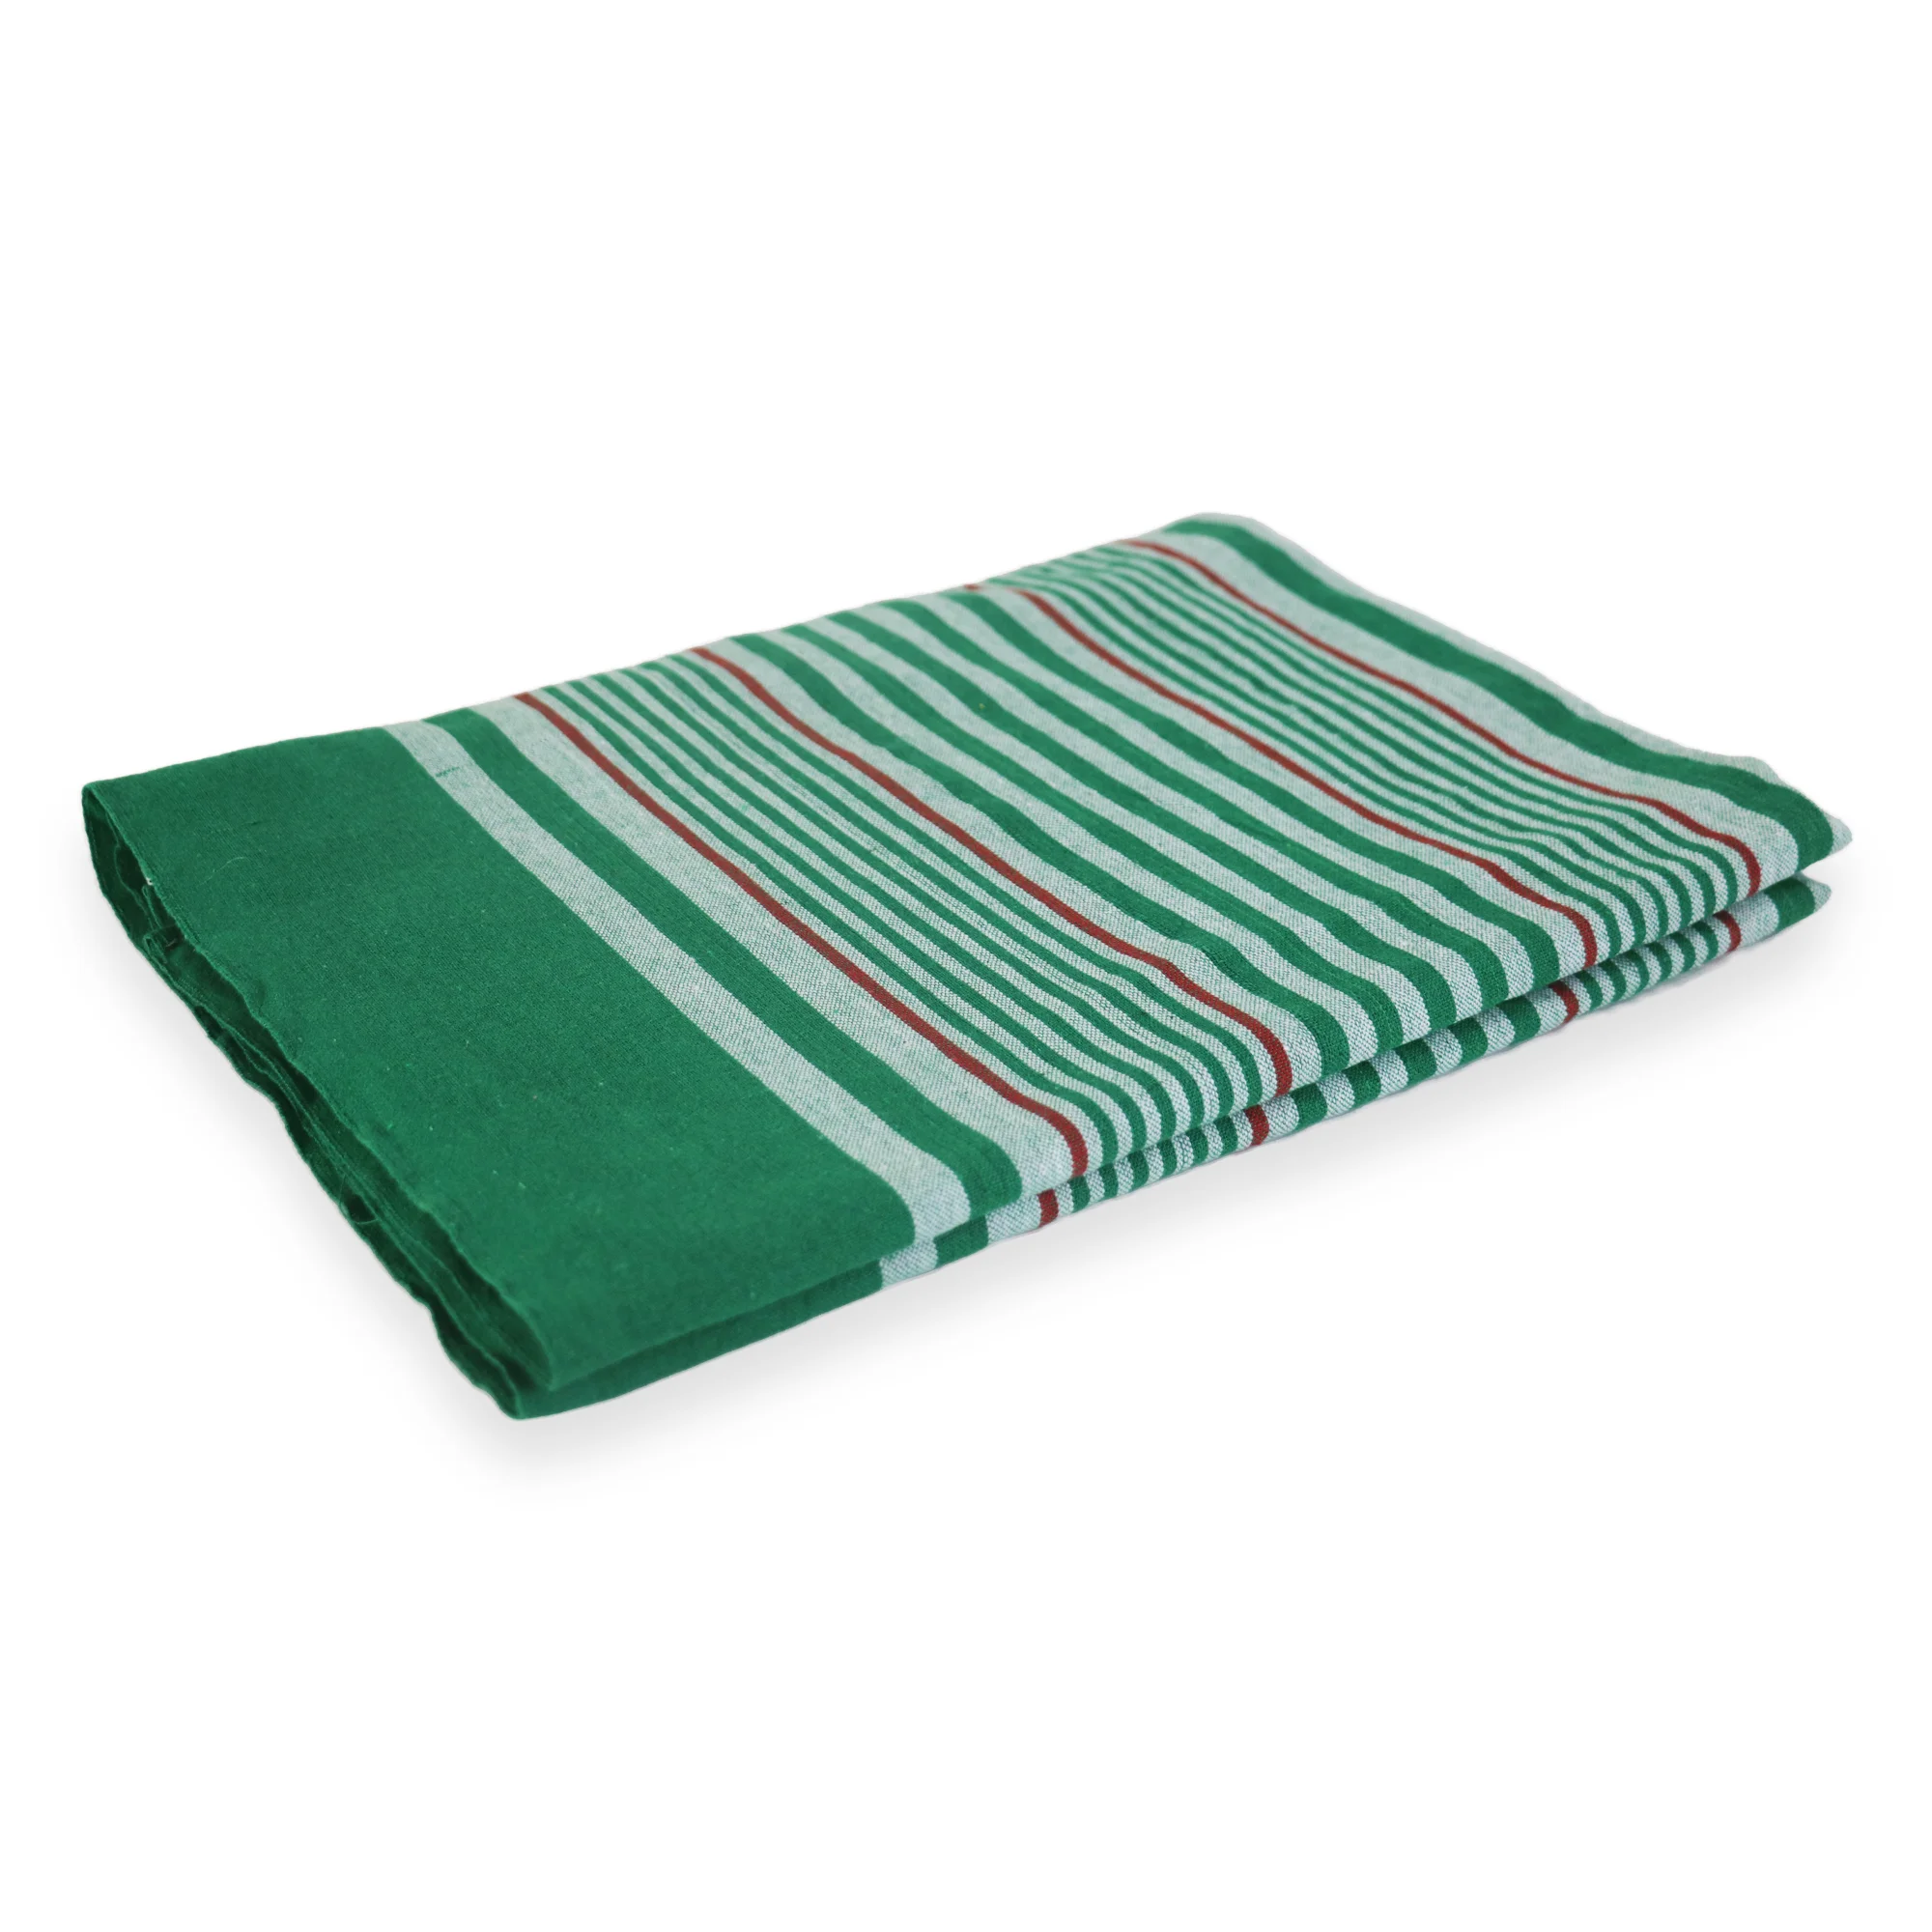 Green Handloom Cotton Bed Sheets 54x80 (Inches) Light Color for Double, Single Beds